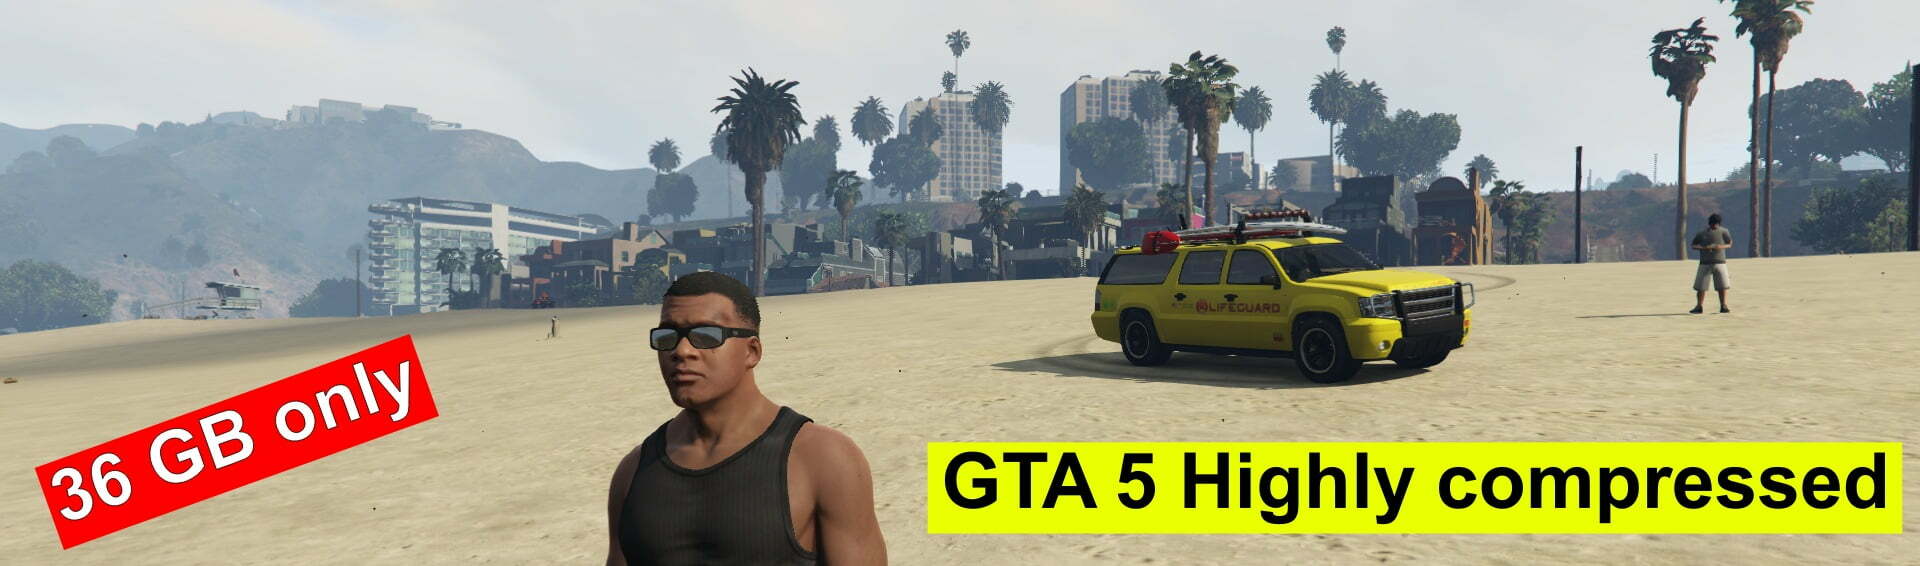 GTA 5 highly compressed download for PC